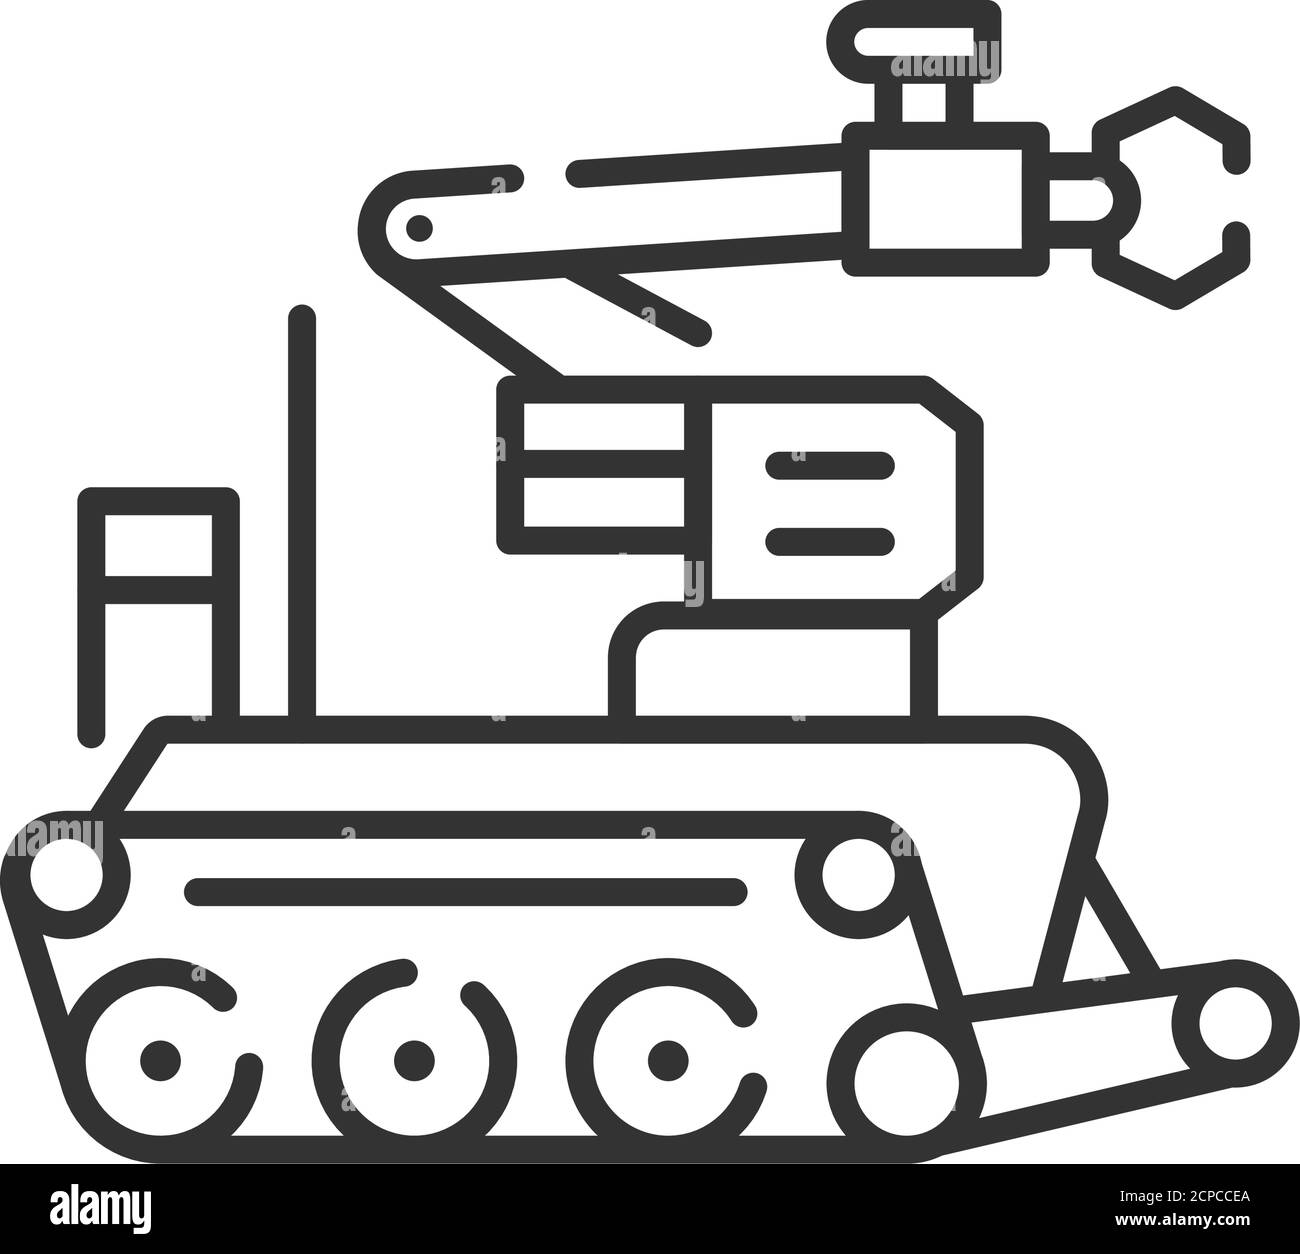 Military robot black line icon. Bomb-disposal robot or explosive ordnance disposal EOD. Innovation in technology. Sign for web page, app. UI UX GUI Stock Vector